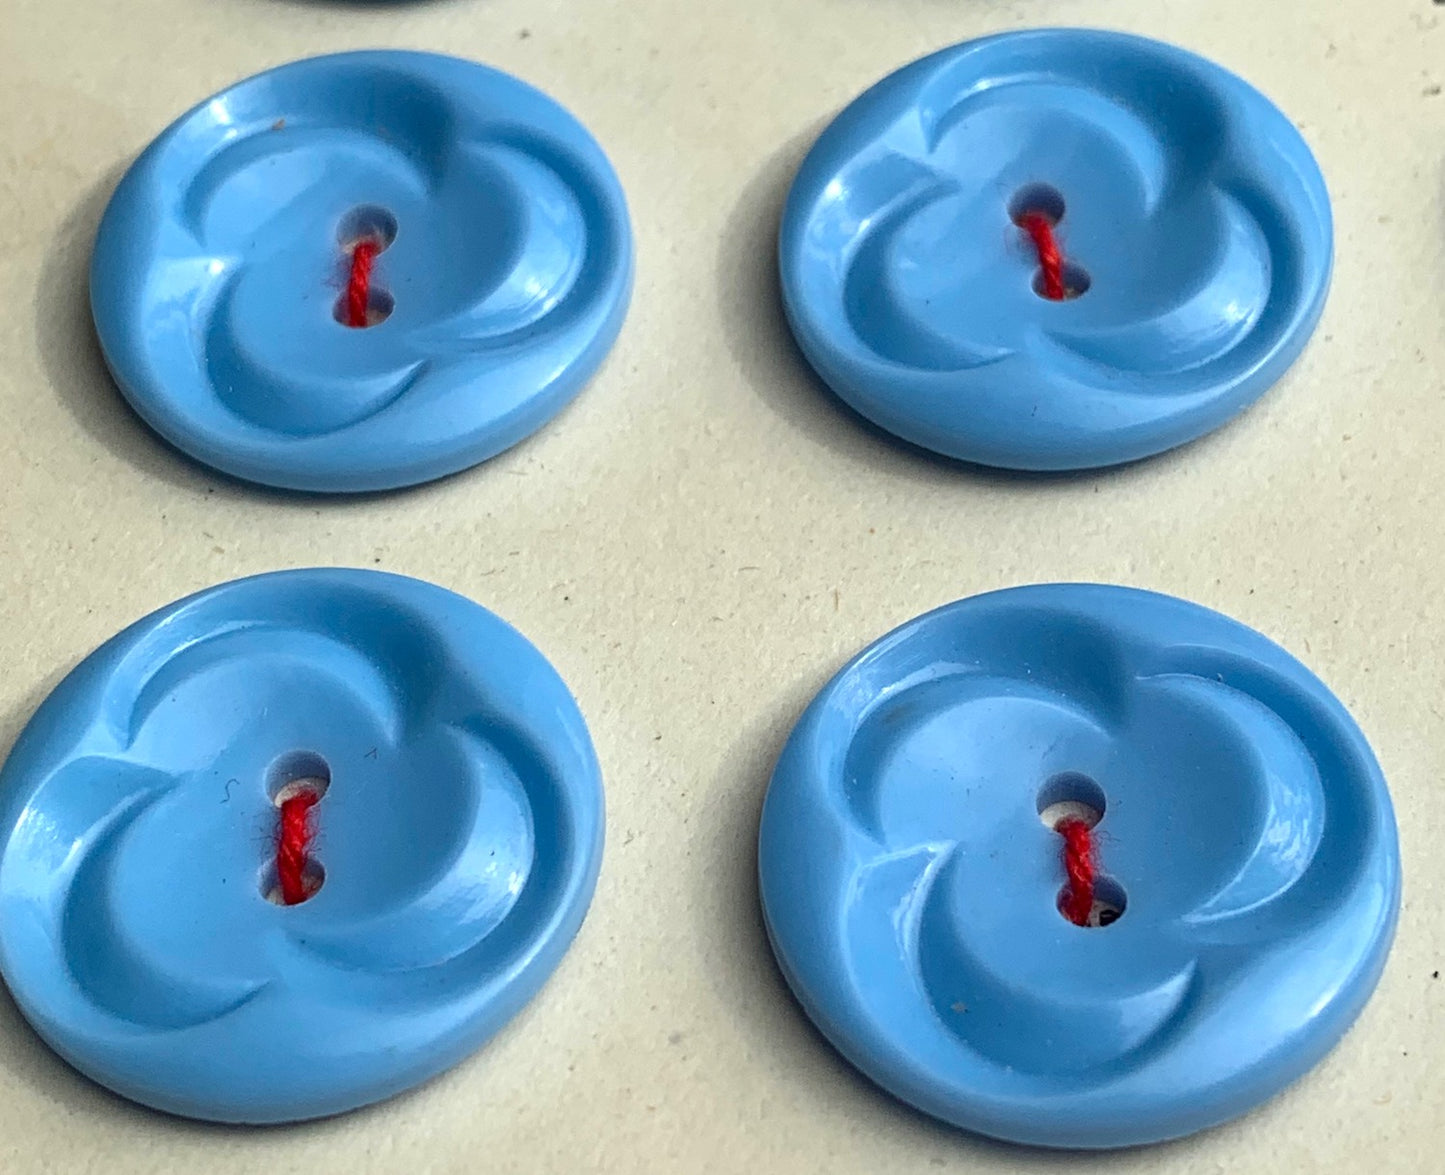 Joyful Baby Blue Vintage 2.2cm Buttons - 12 or 6 - Made in England